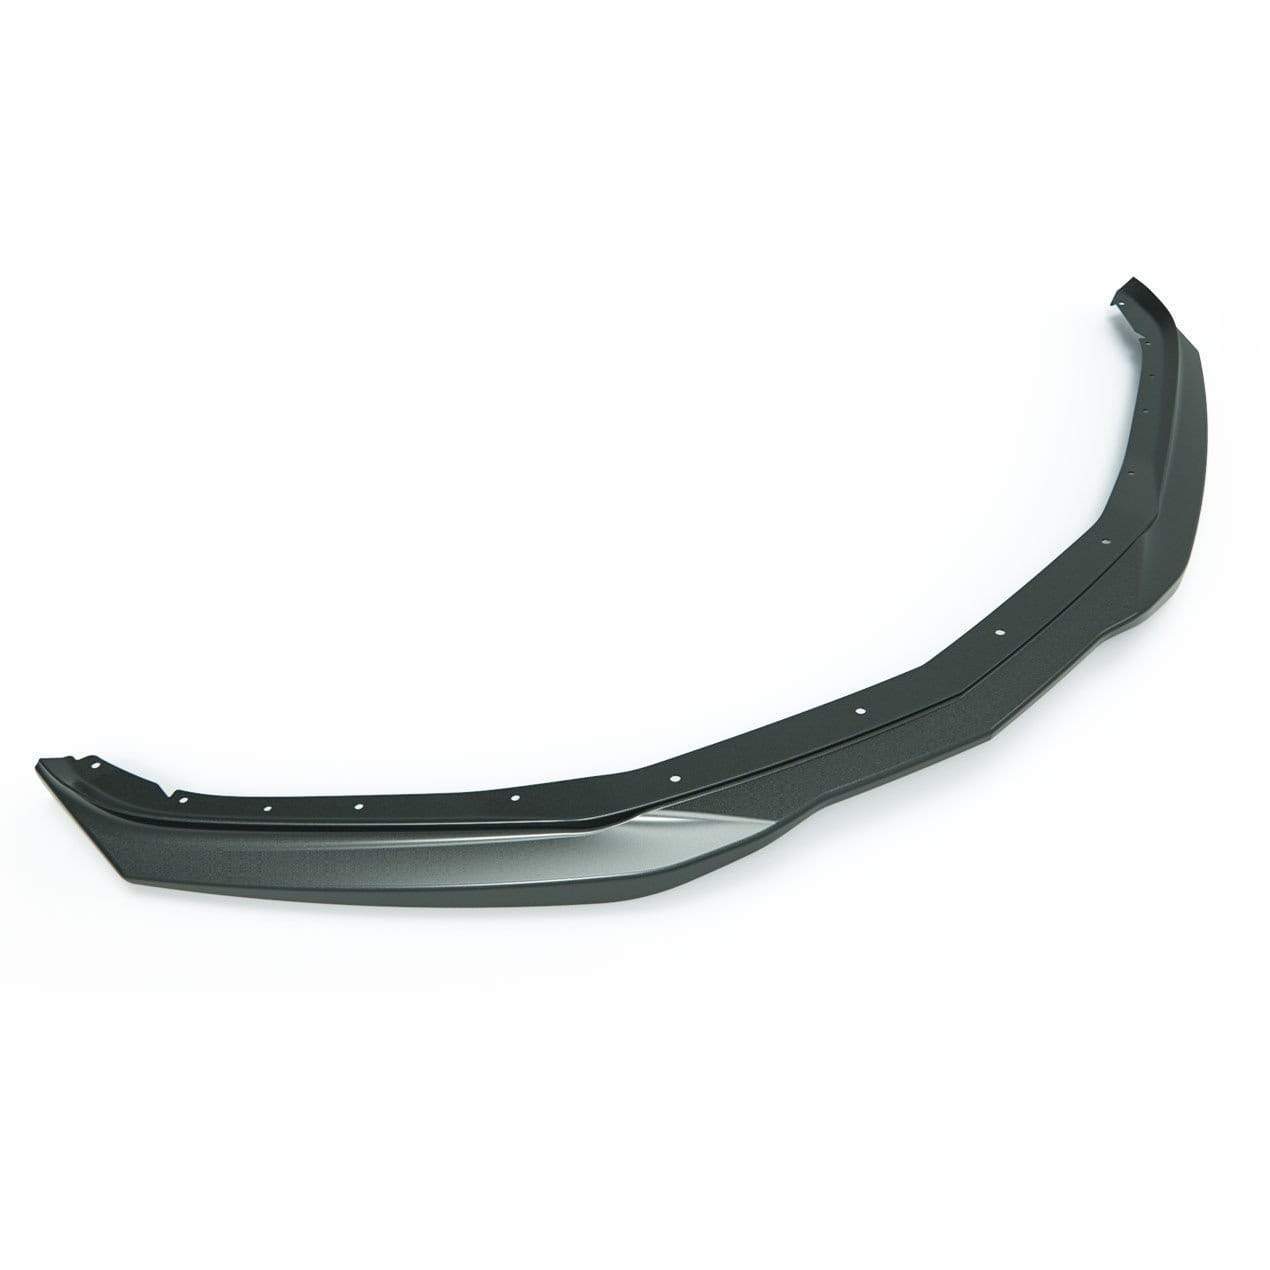 ACS Composite T6 Front Splitter for 2016+ Camaro SS [48-4-001|48-4-009]GBA - Primer with No Endcaps - Enhance aerodynamic performance and control.